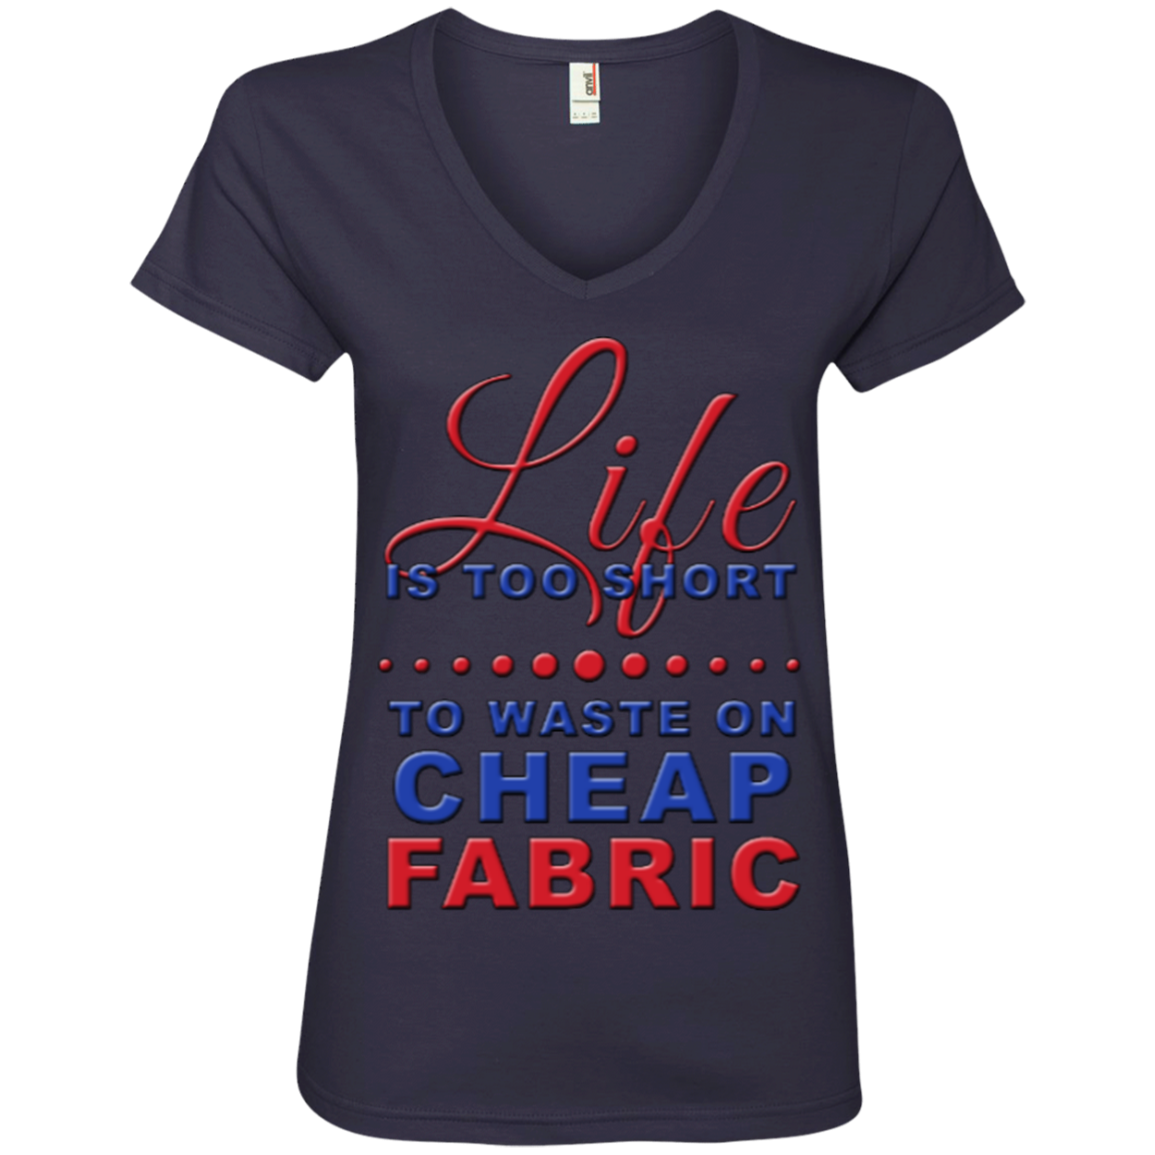 Life Is Too Short to Use Cheap Fabric Ladies V-Neck Tee - Crafter4Life - 6